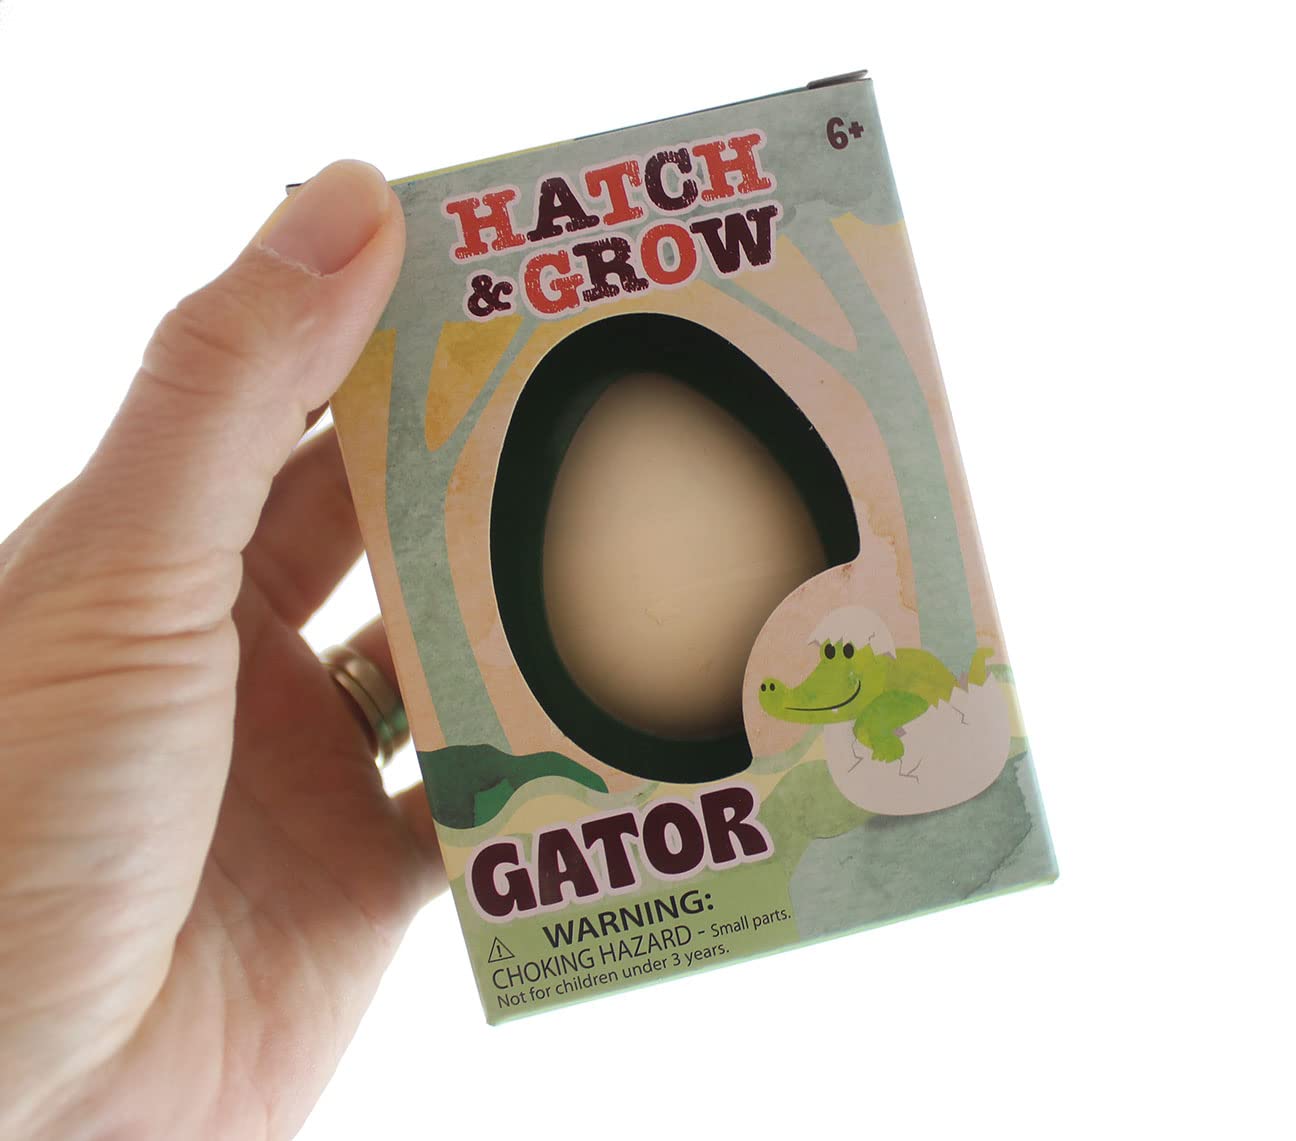 1 Hatch a Gator Alligator Ocean Animal Grow in Water - Add Water and it Grows up to 4